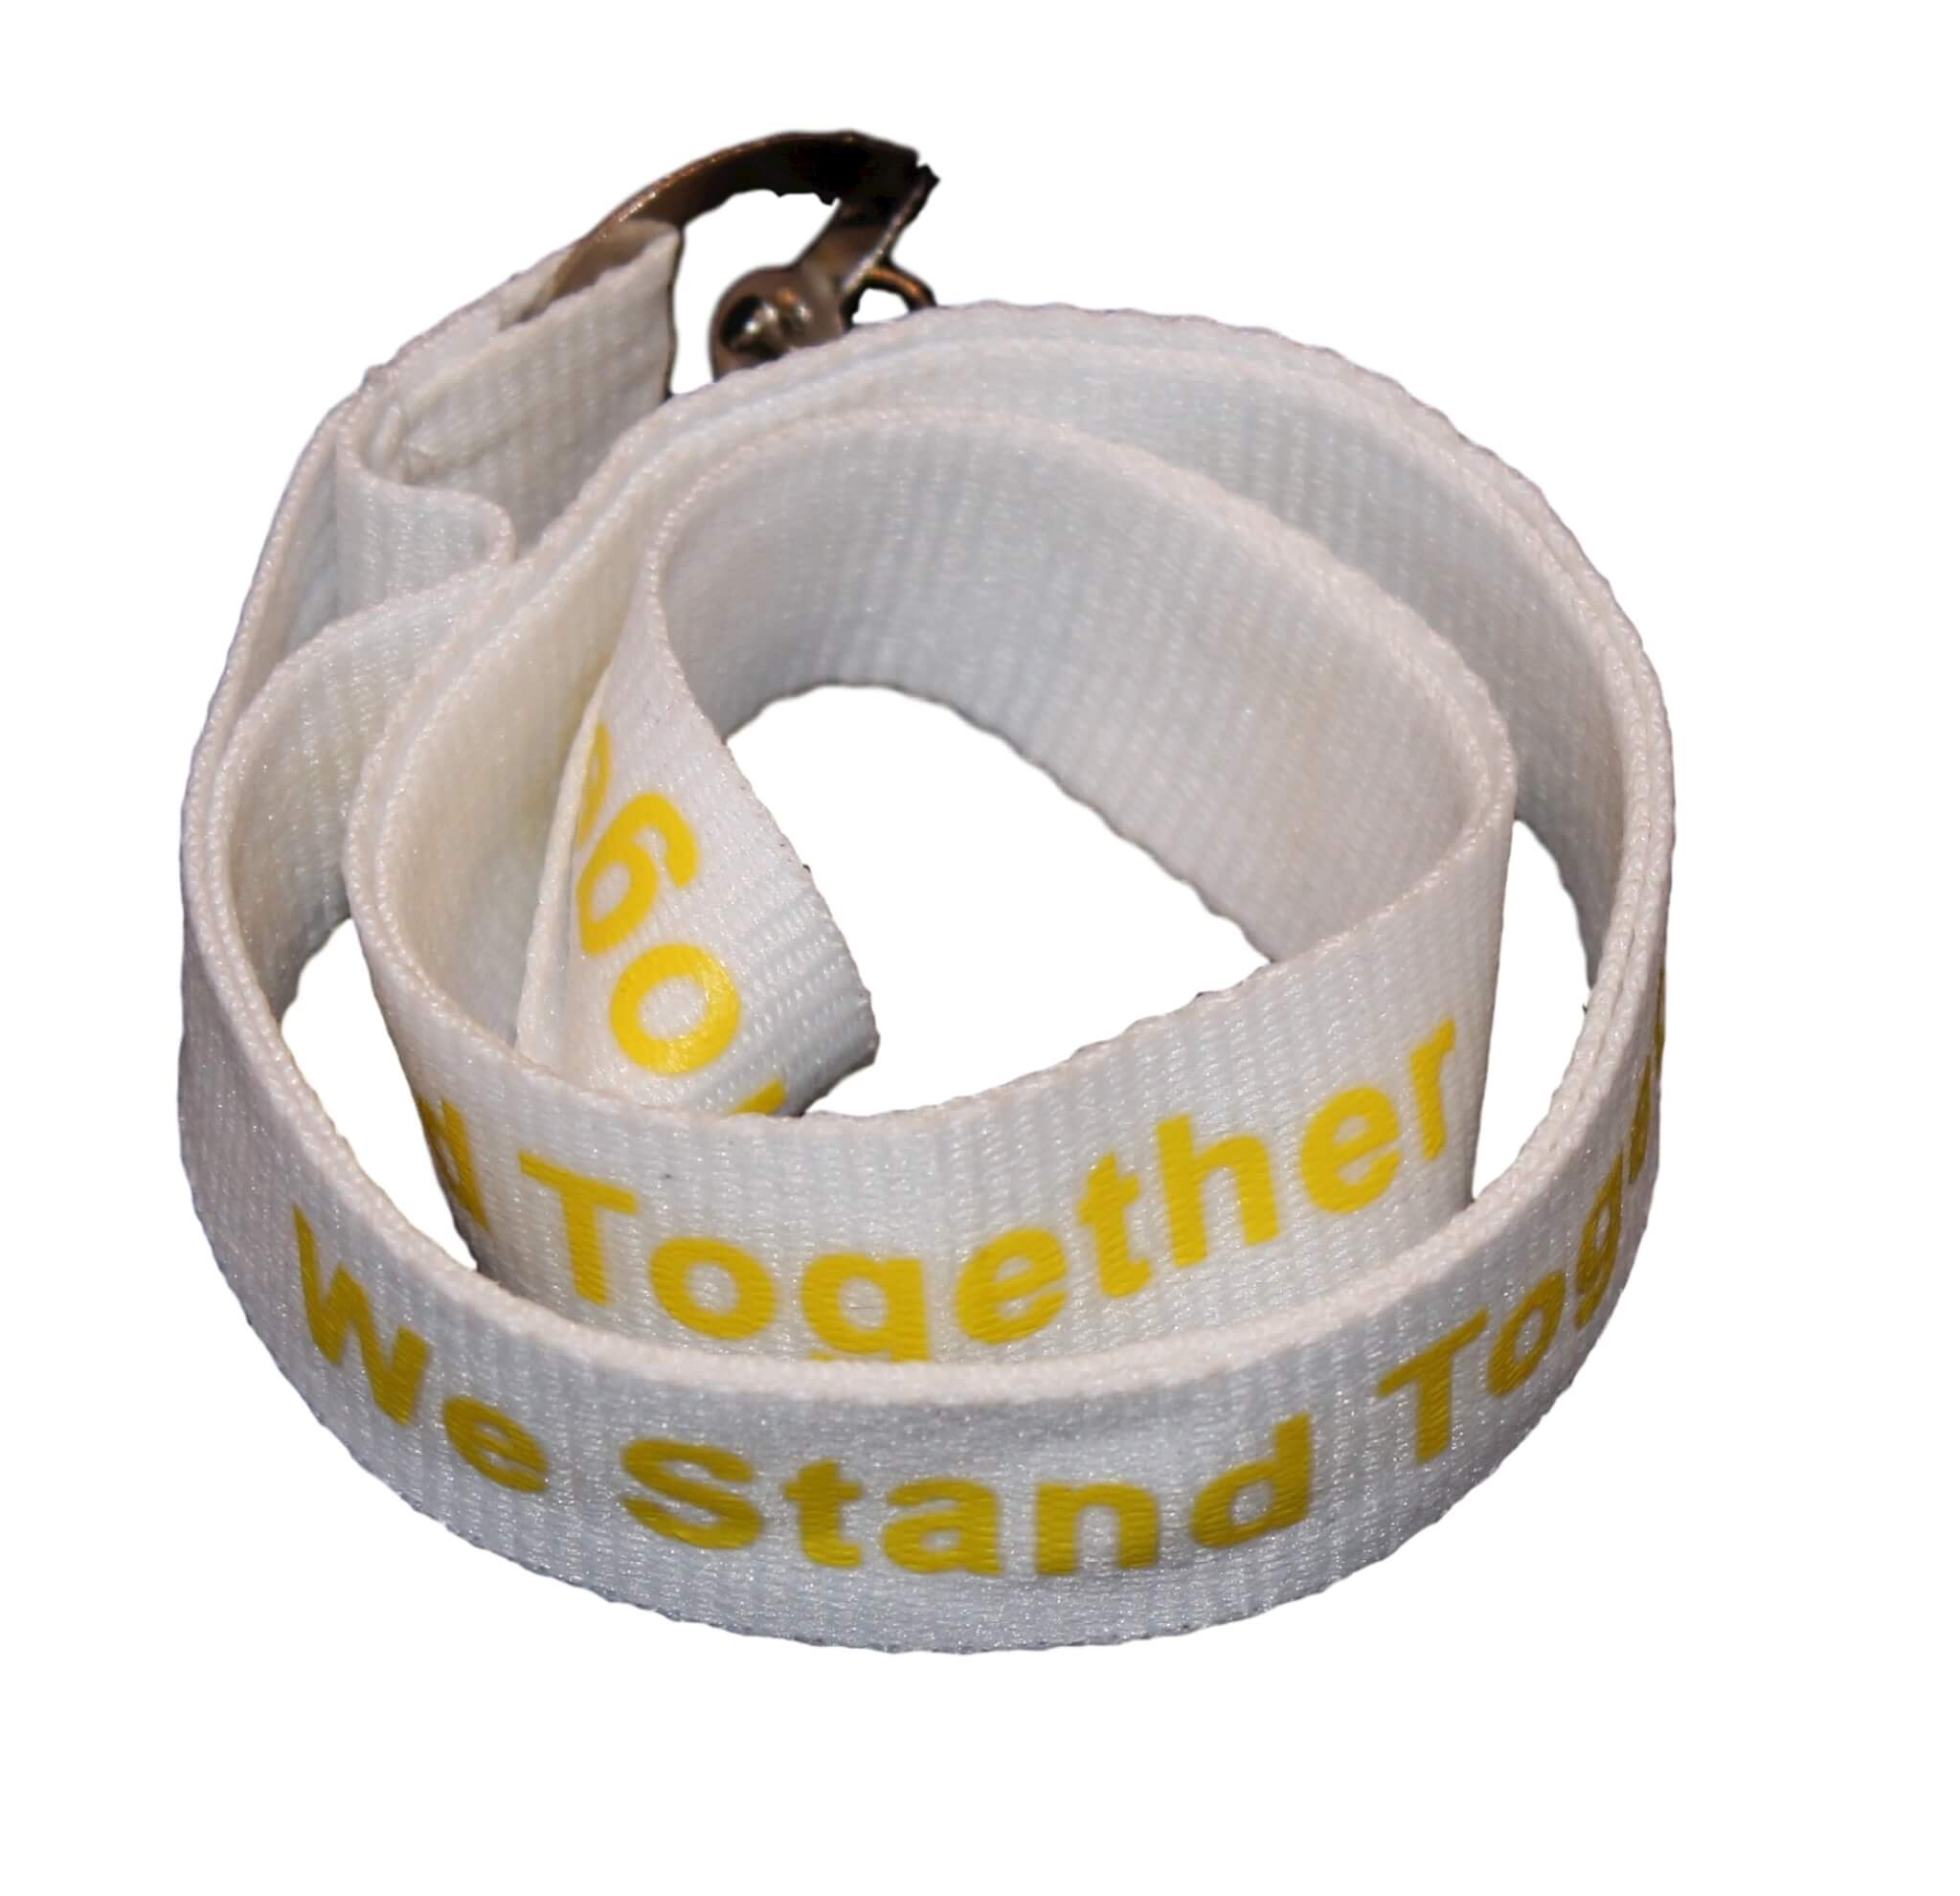 White lanyard with yellow "We Stand Together" text and yellow awareness ribbons